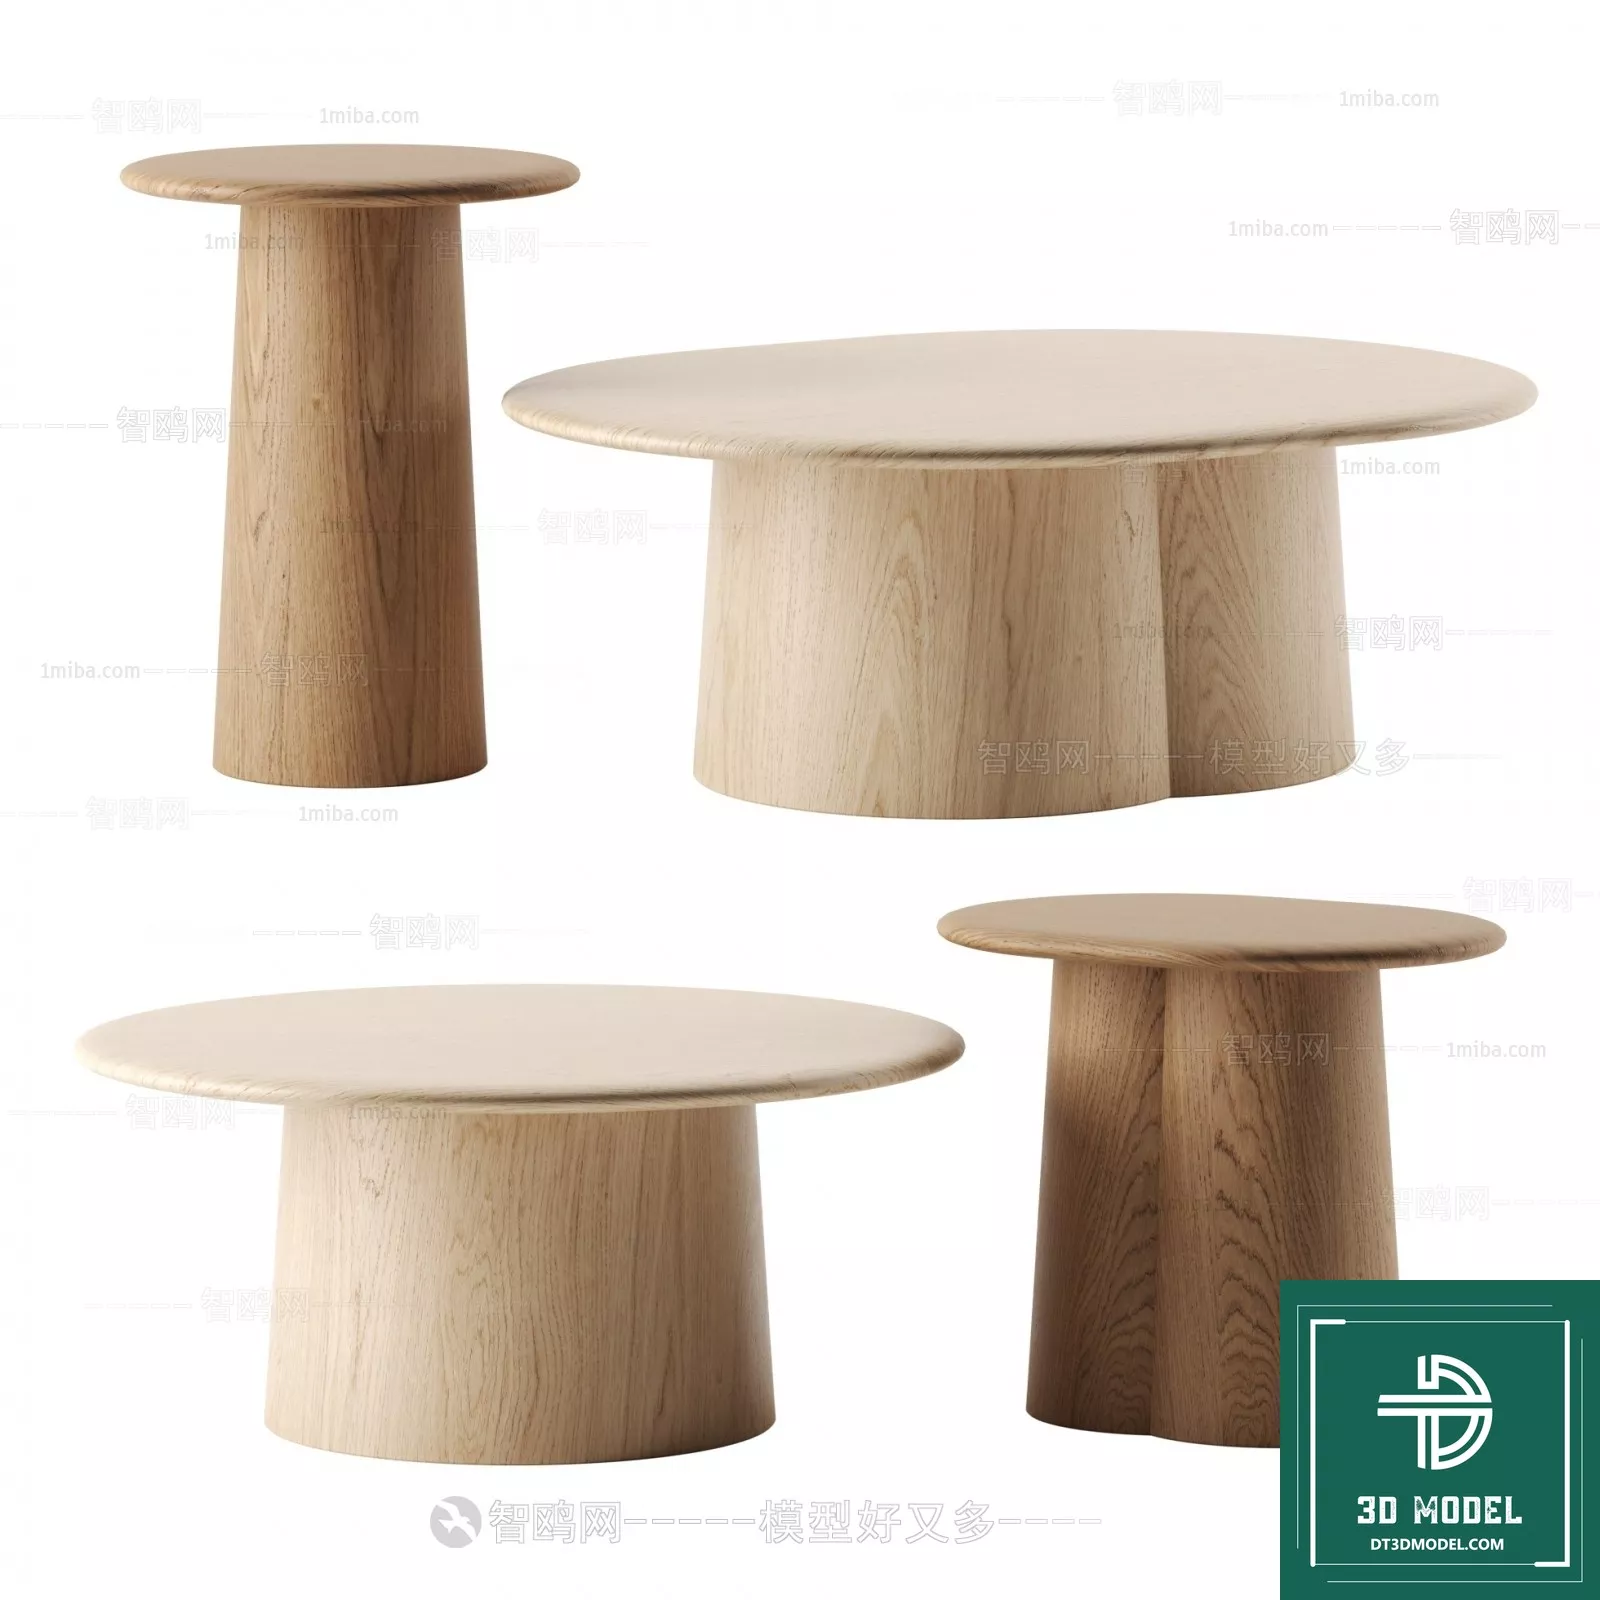 MODERN TEA TABLE - SKETCHUP 3D MODEL - VRAY OR ENSCAPE - ID14945